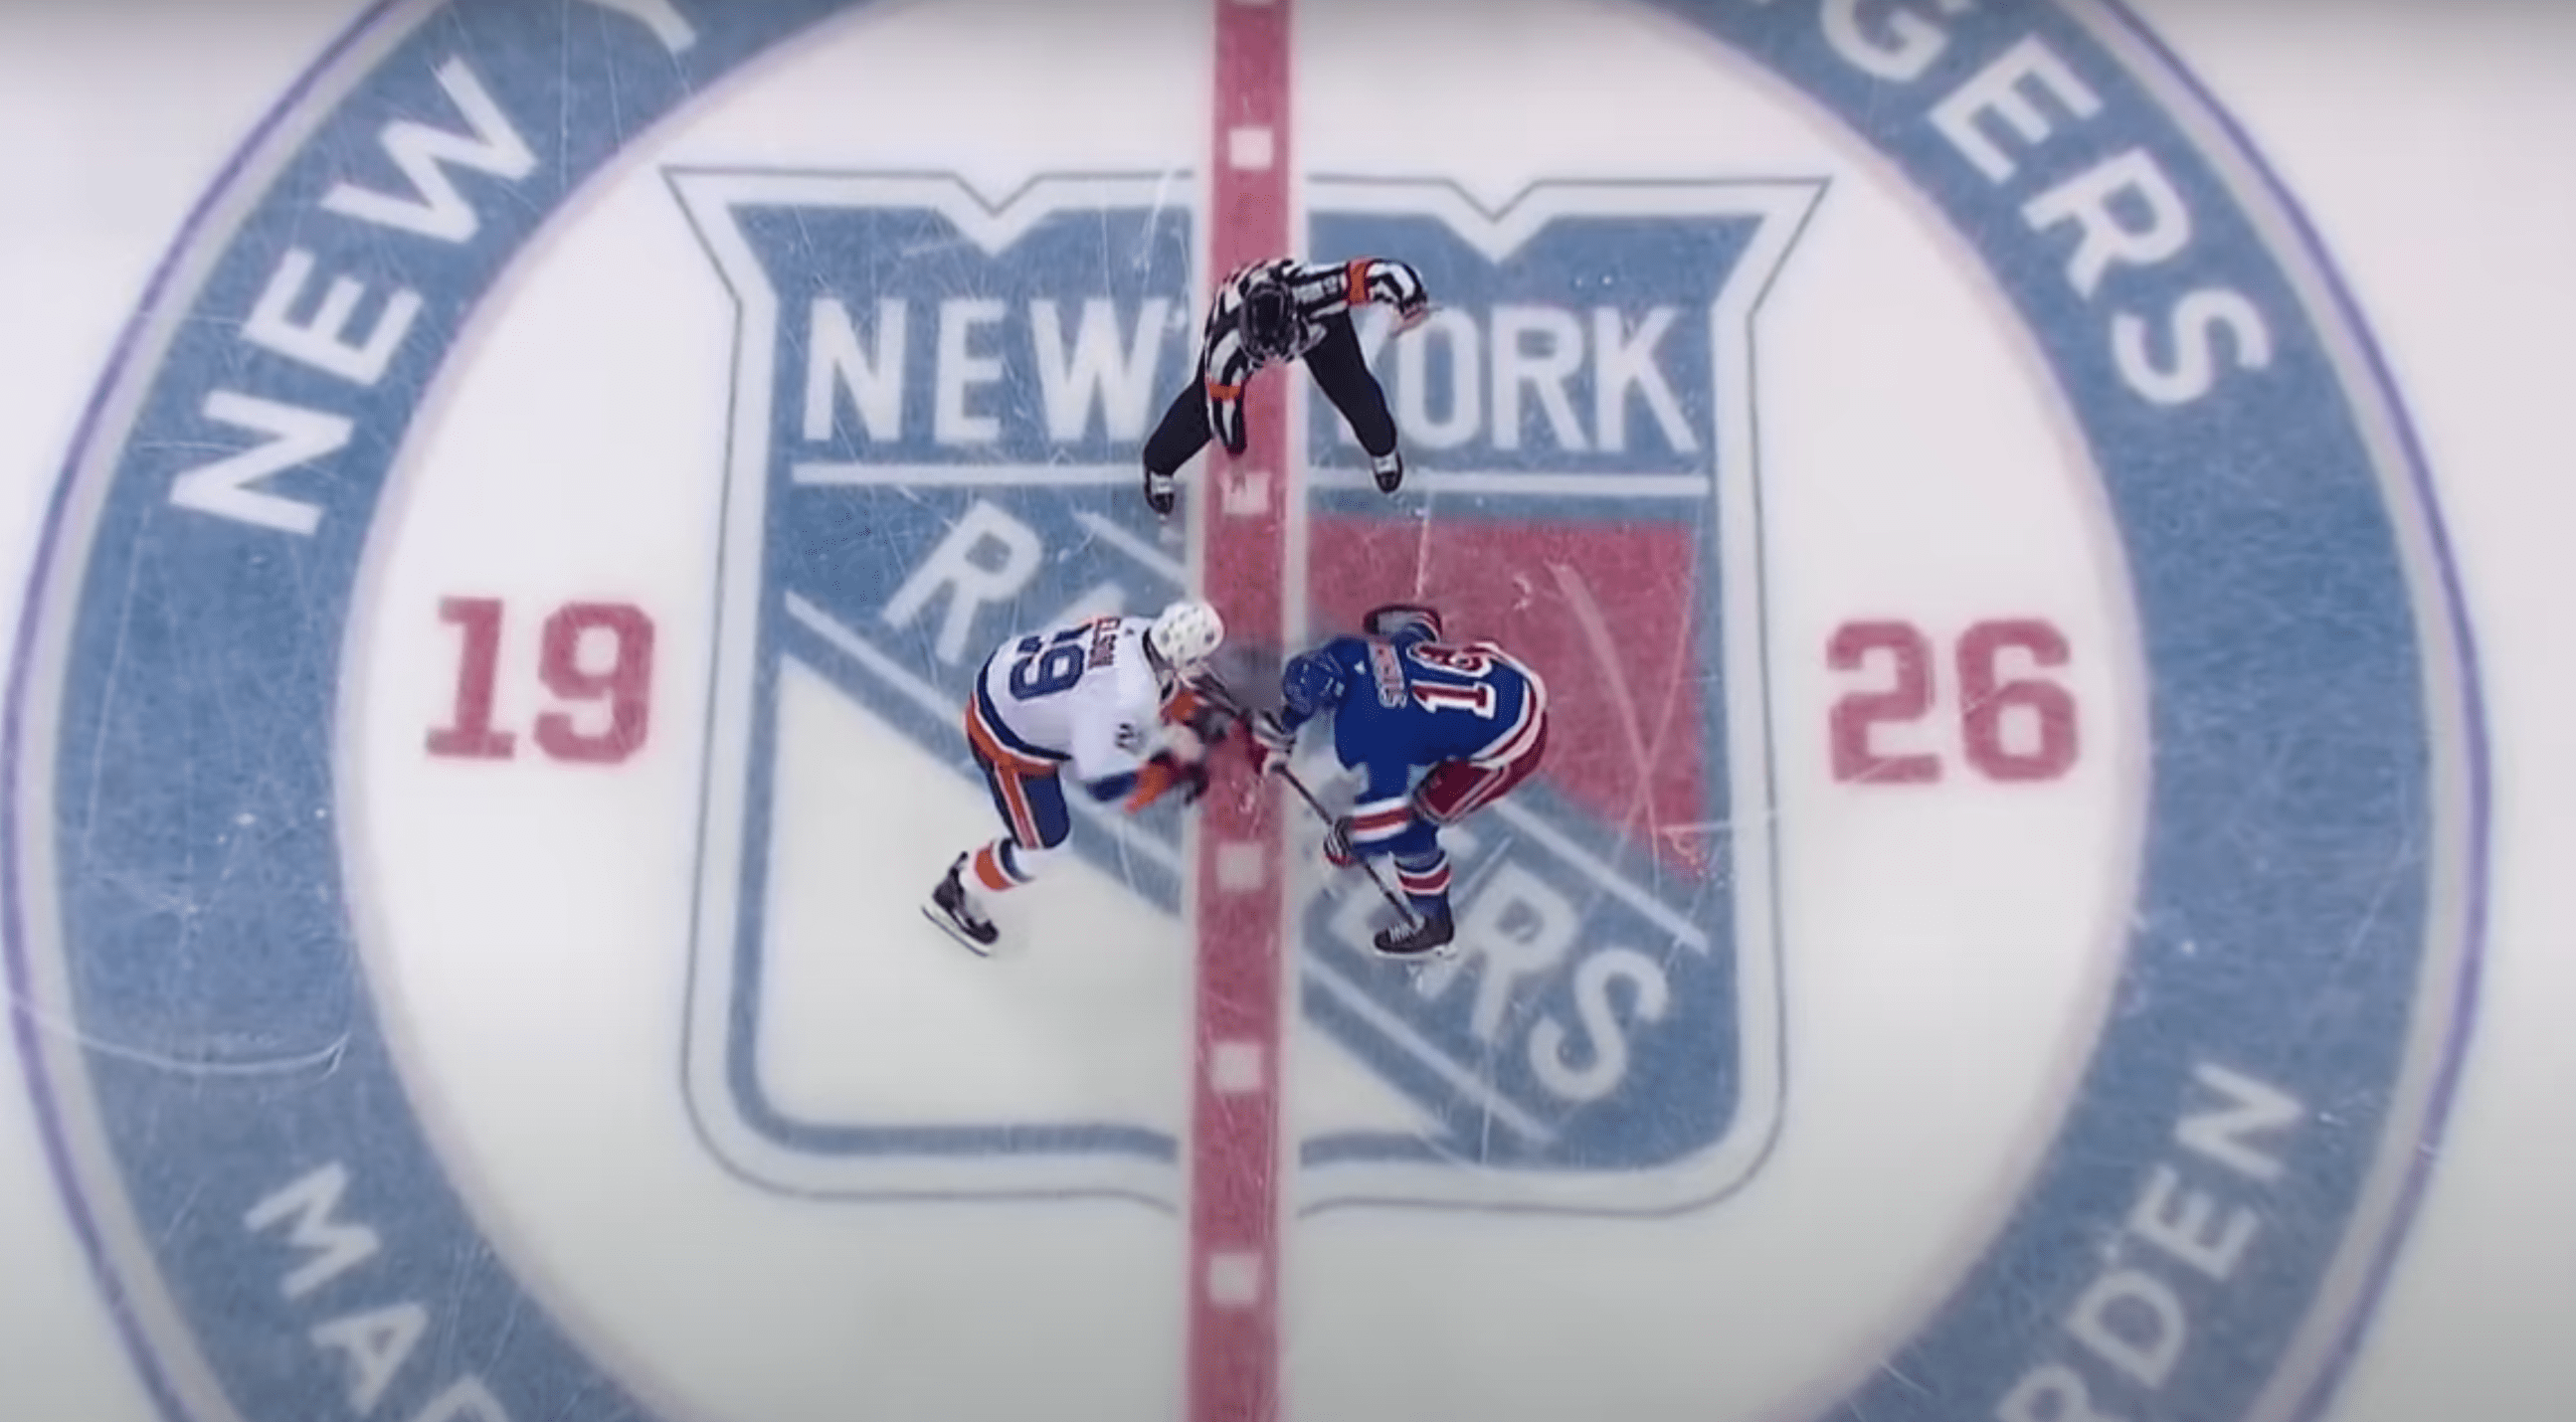 New York Islanders lineup faceoff with the New York Rangers